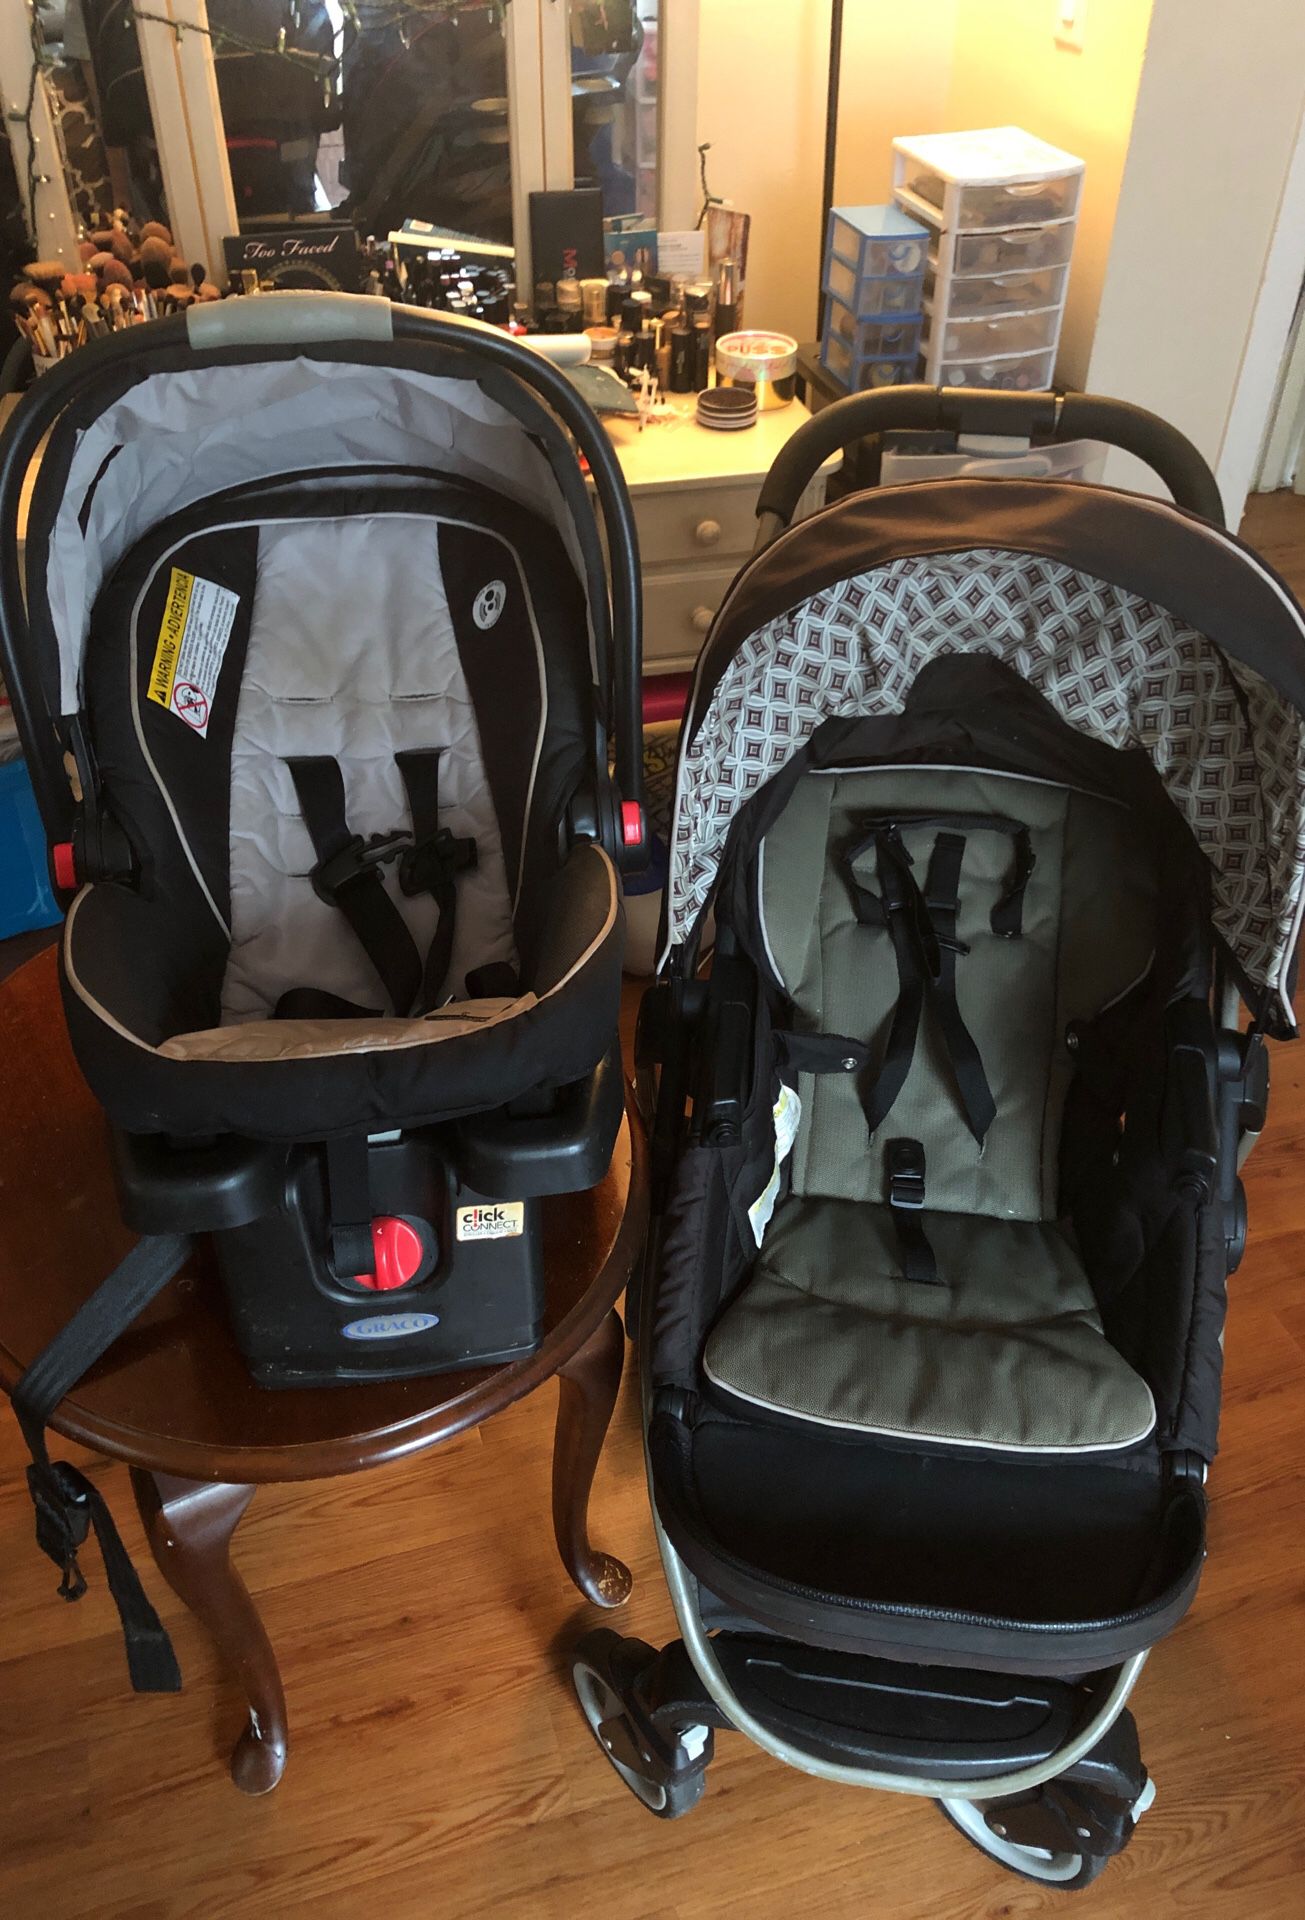 Graco Click Connect Stroller & Car seat